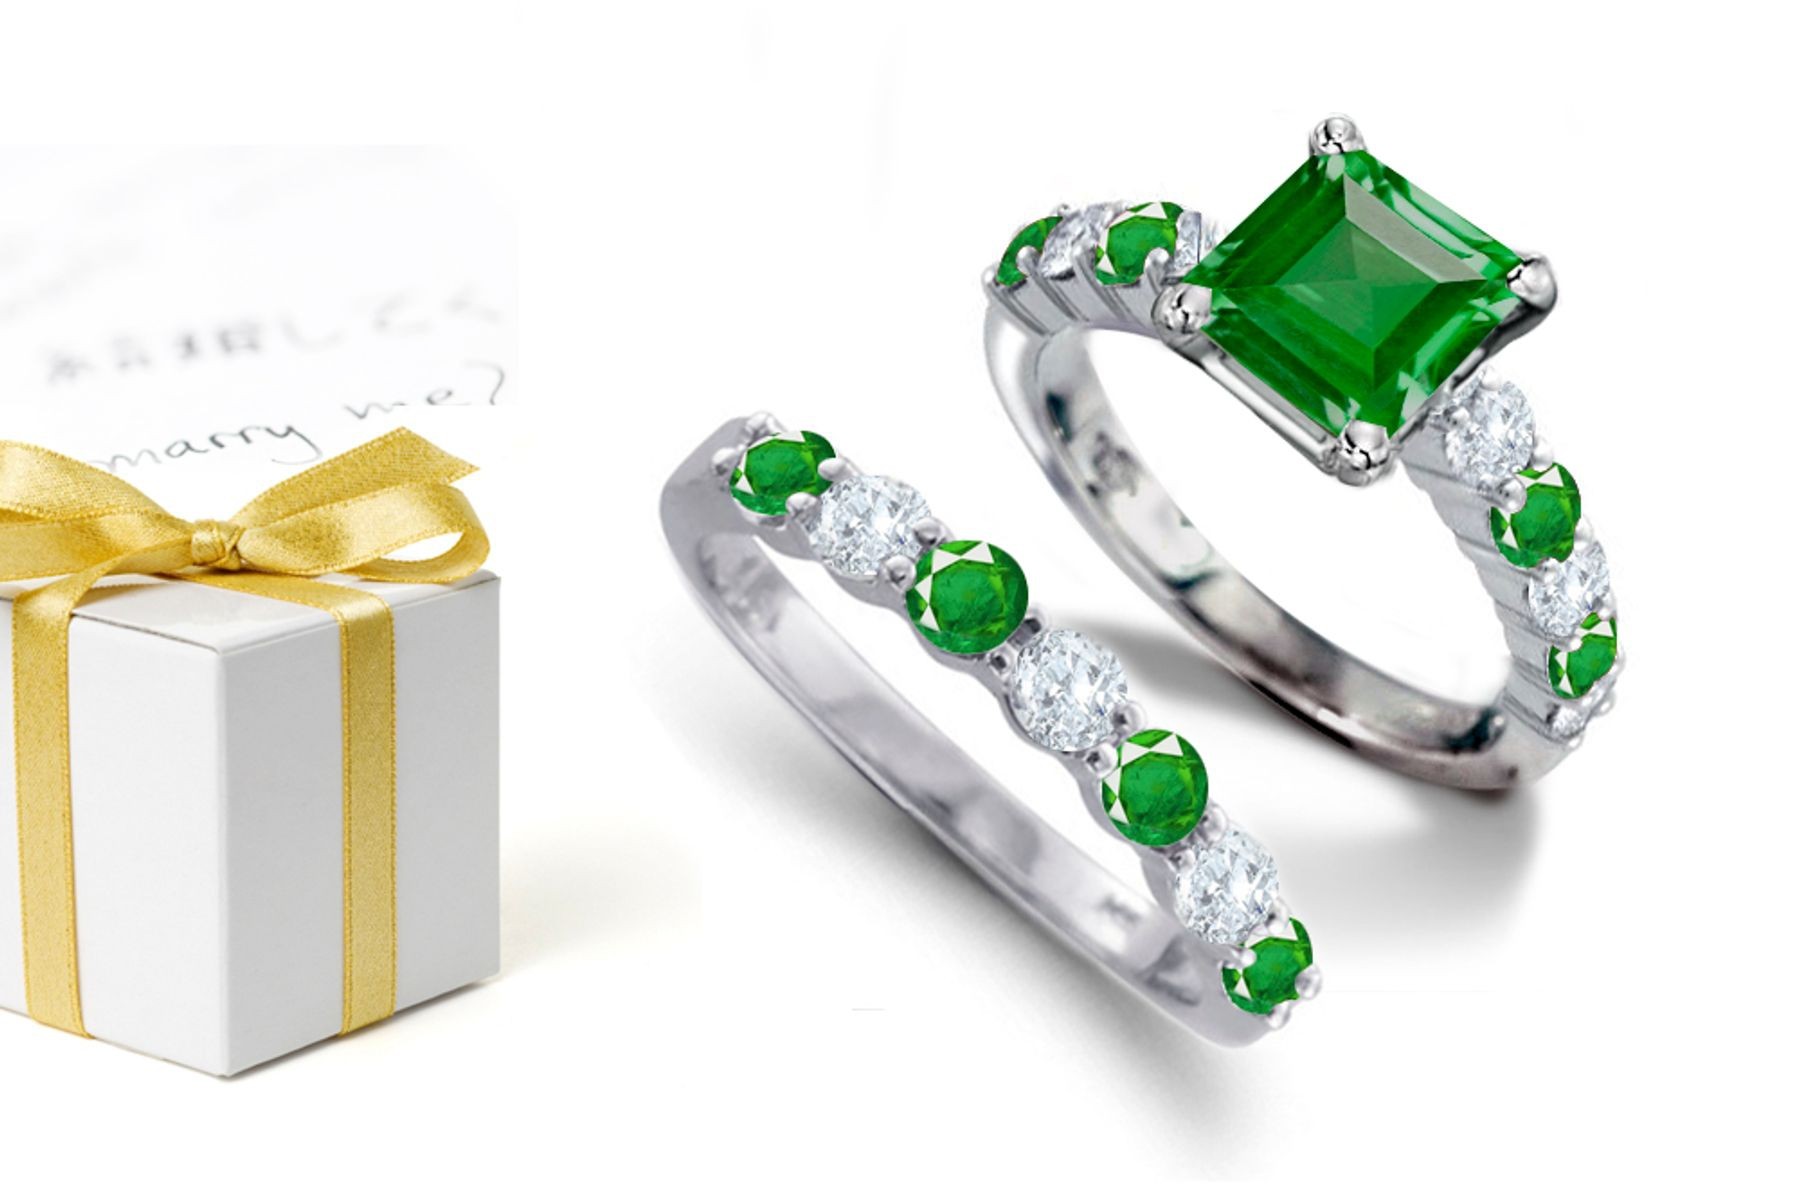 True Princess: Discover This Classic Diamond & Princess Cut Emerald Ring & Round Emerald & get it with This Gold Diamond Half Gemstone Eternity Band